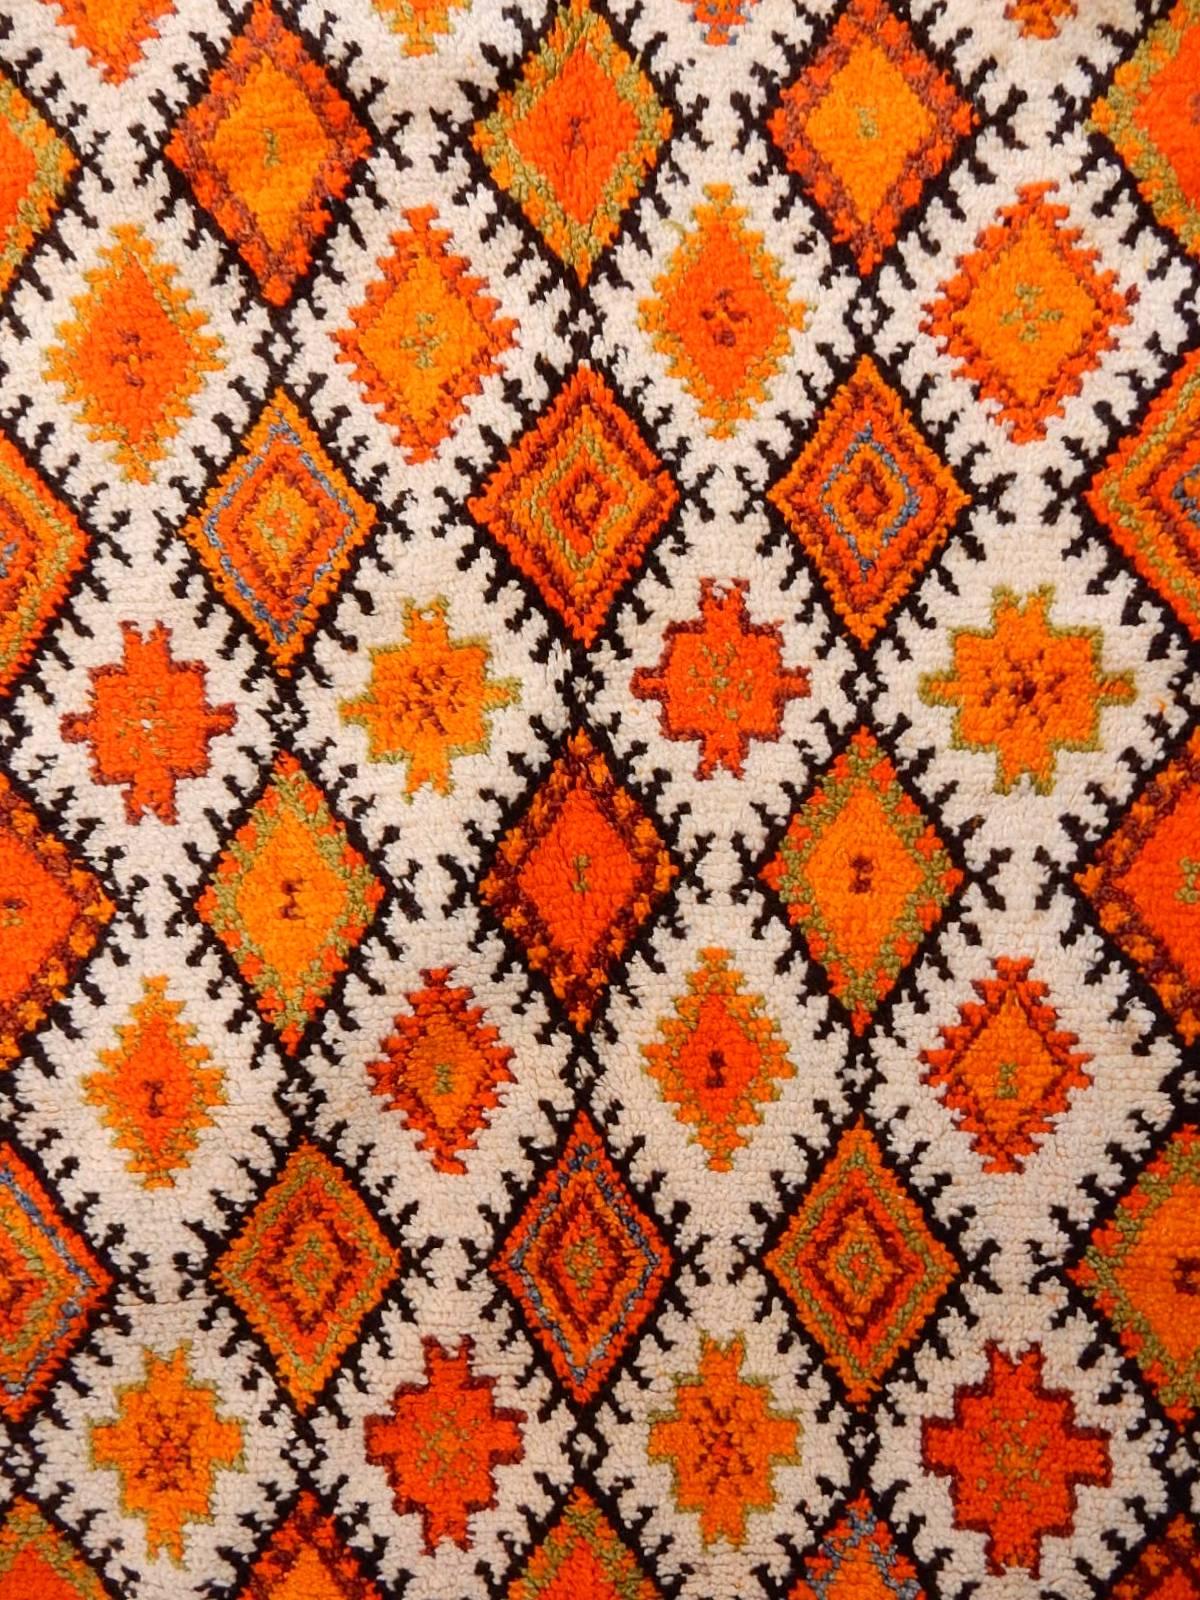 An amazing hand-hooked wool tapestry from 1960s.
Bold bright colors. Fringe edge at bottom. Six wooden rings on top.
Clean and odorless with no fade. Measures: 8 feet x 4-1/2 feet.